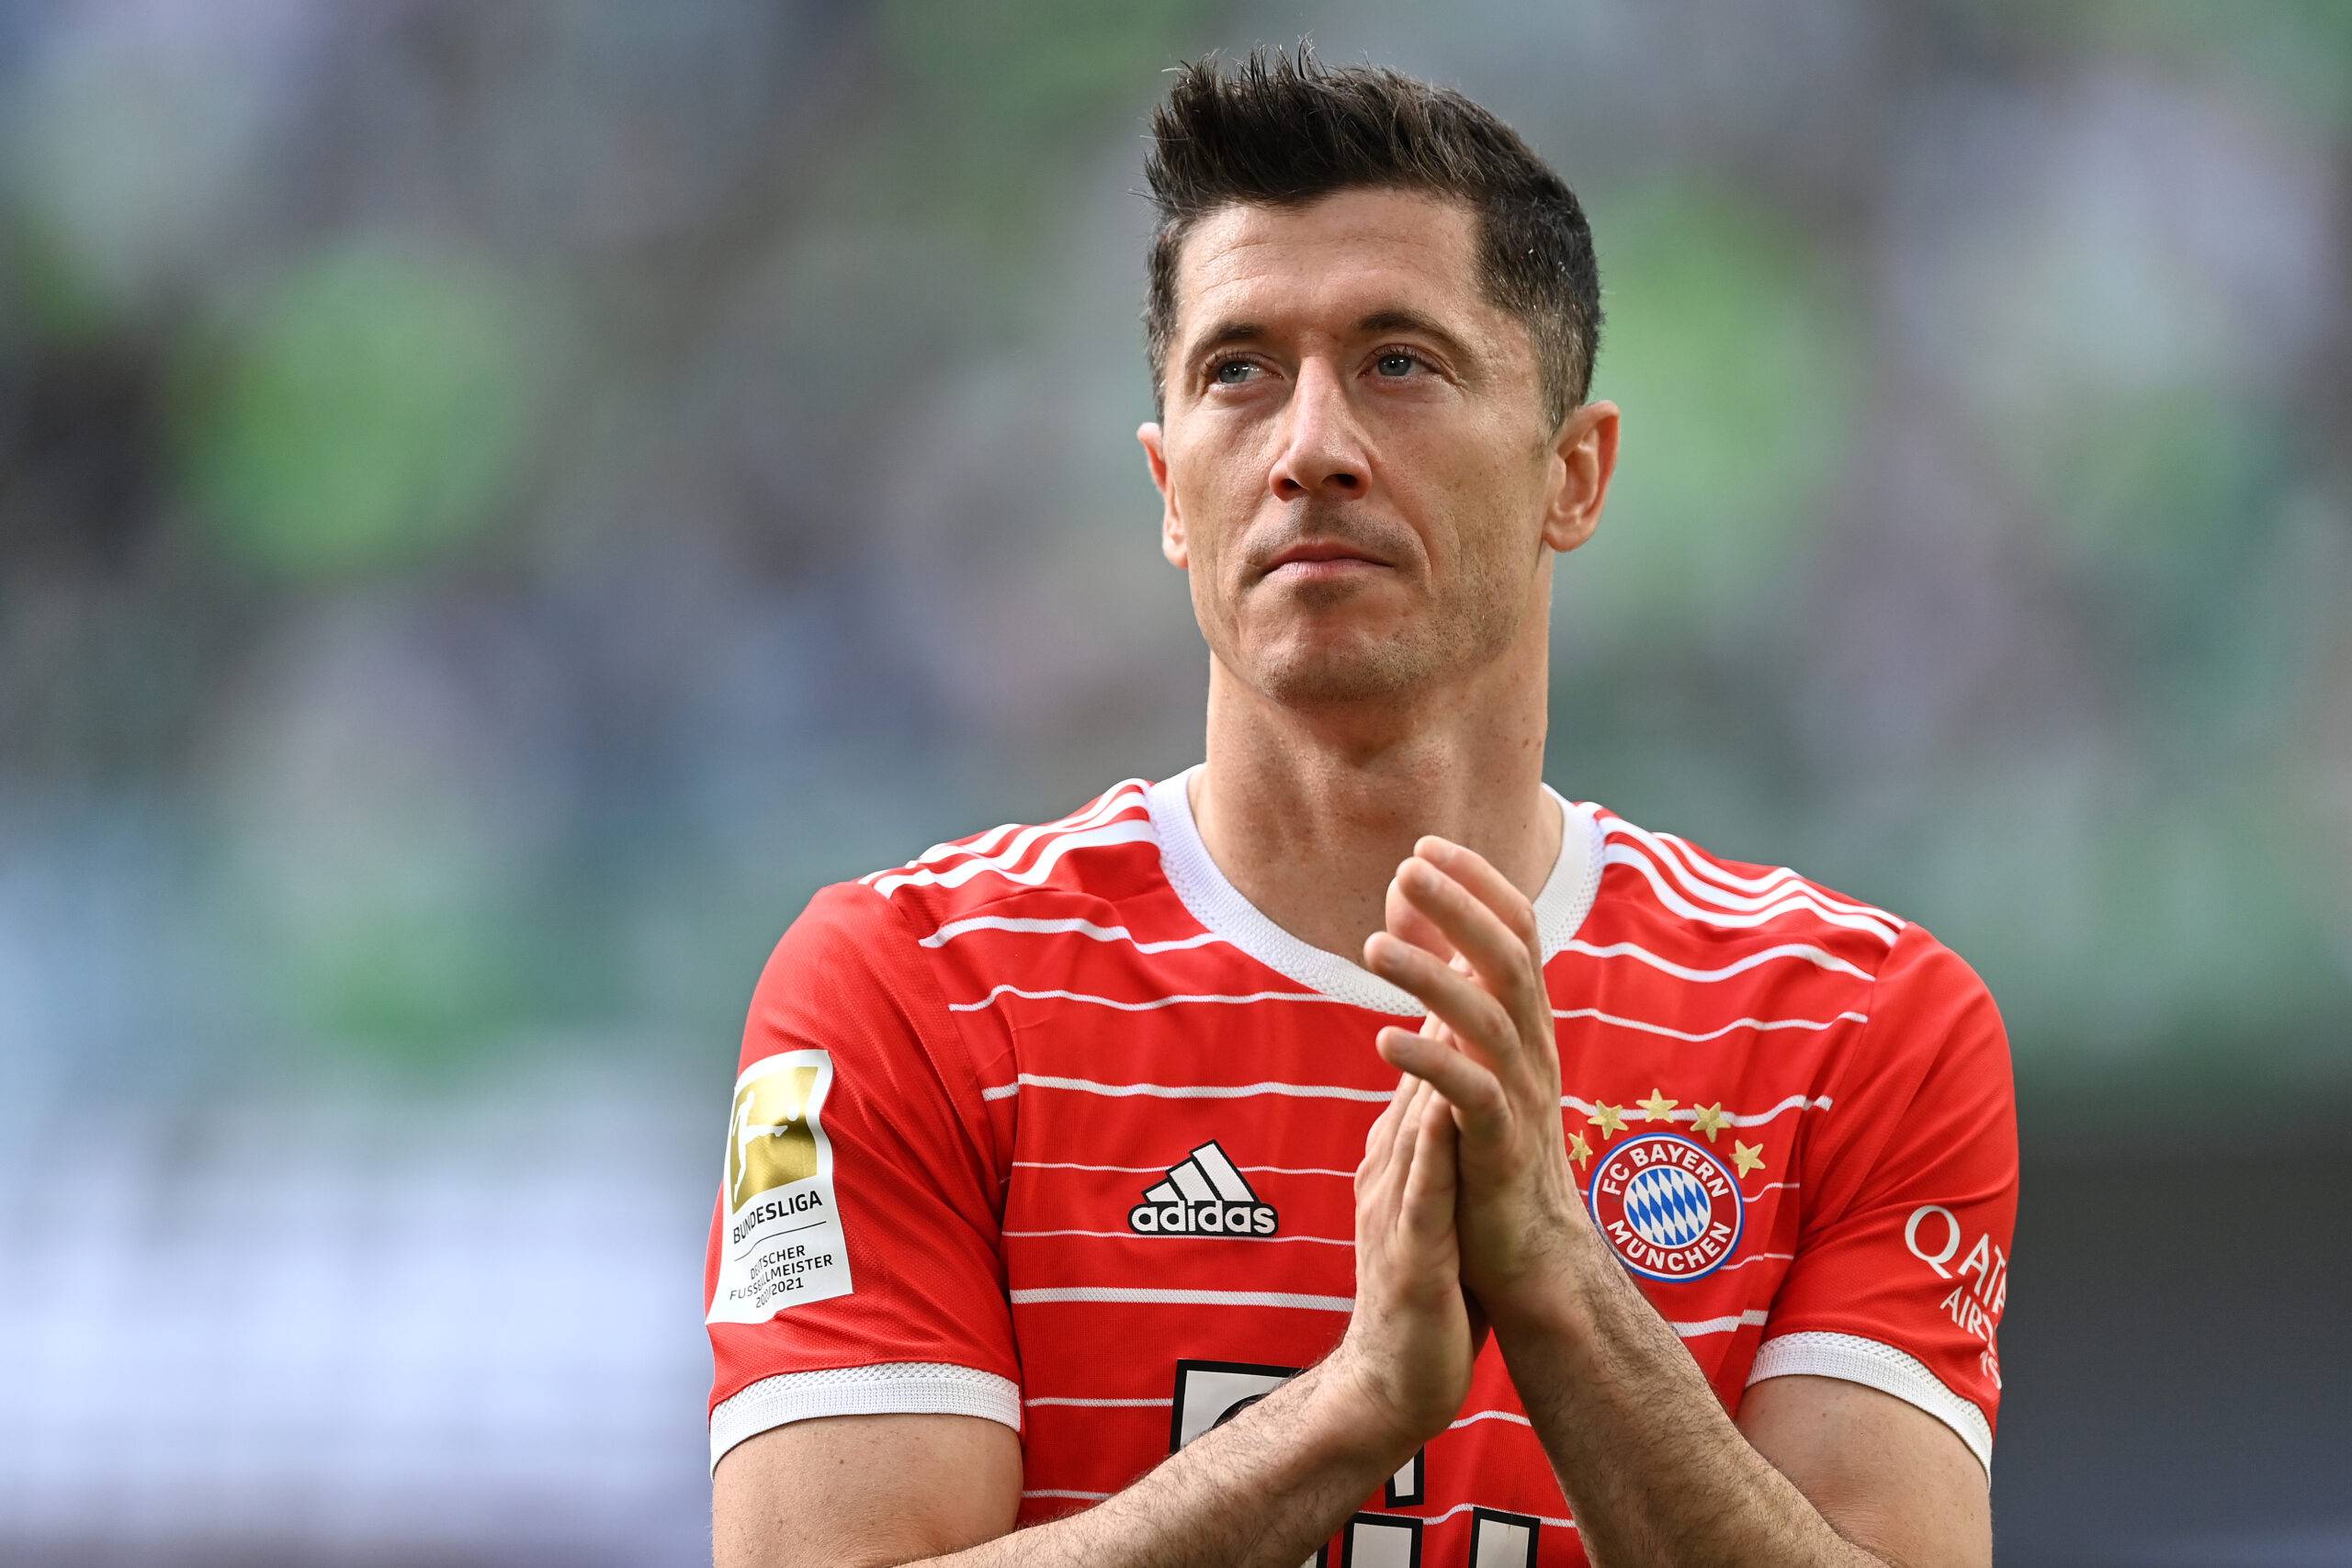 Thread about Robert Lewandowski’s first day back at Bayern shows he doesn't want to be there